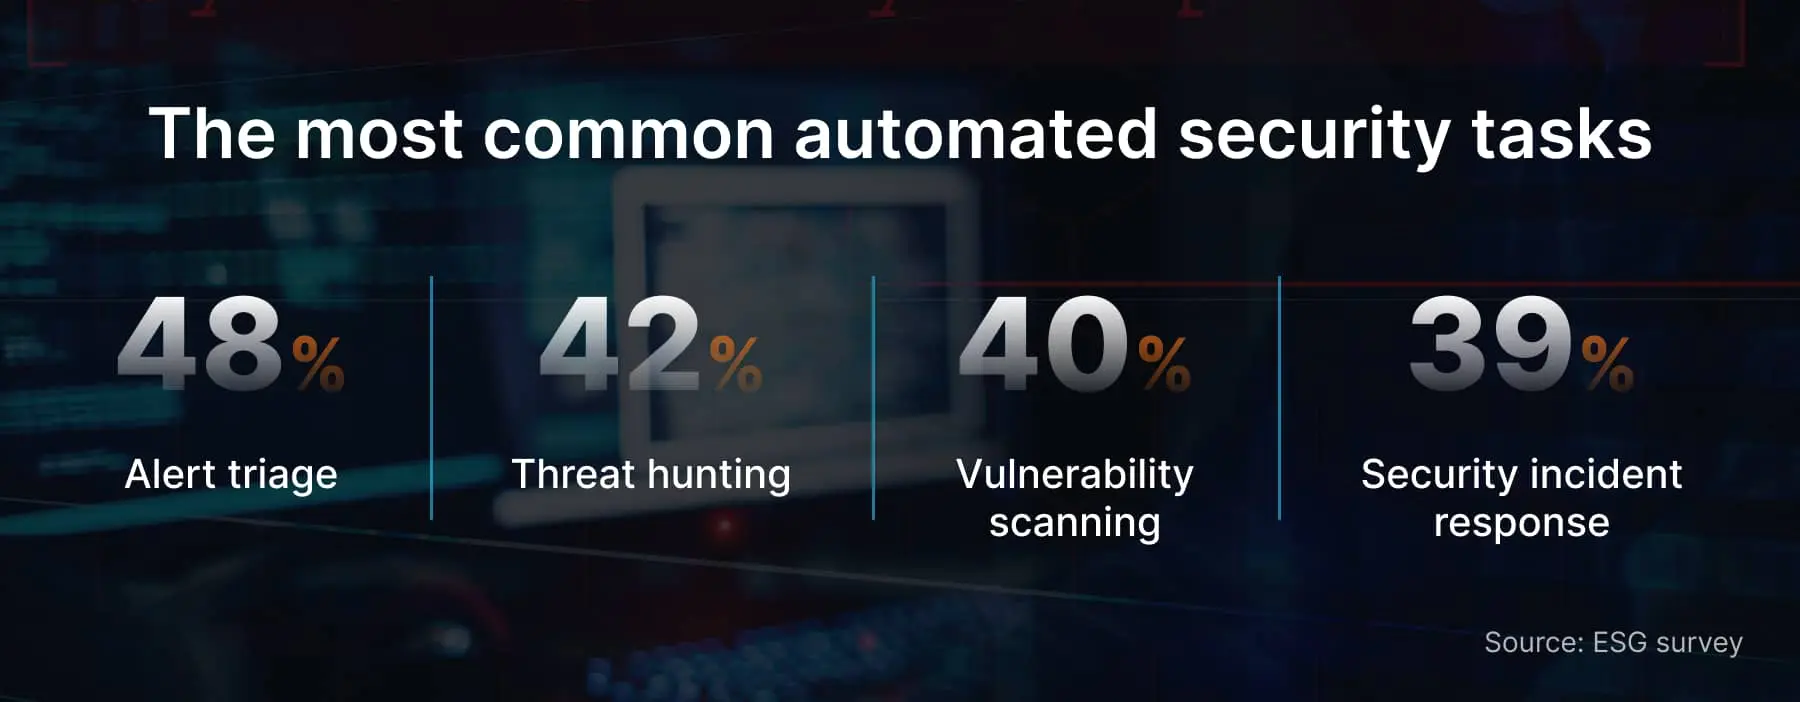 The mosc common automated security tasks